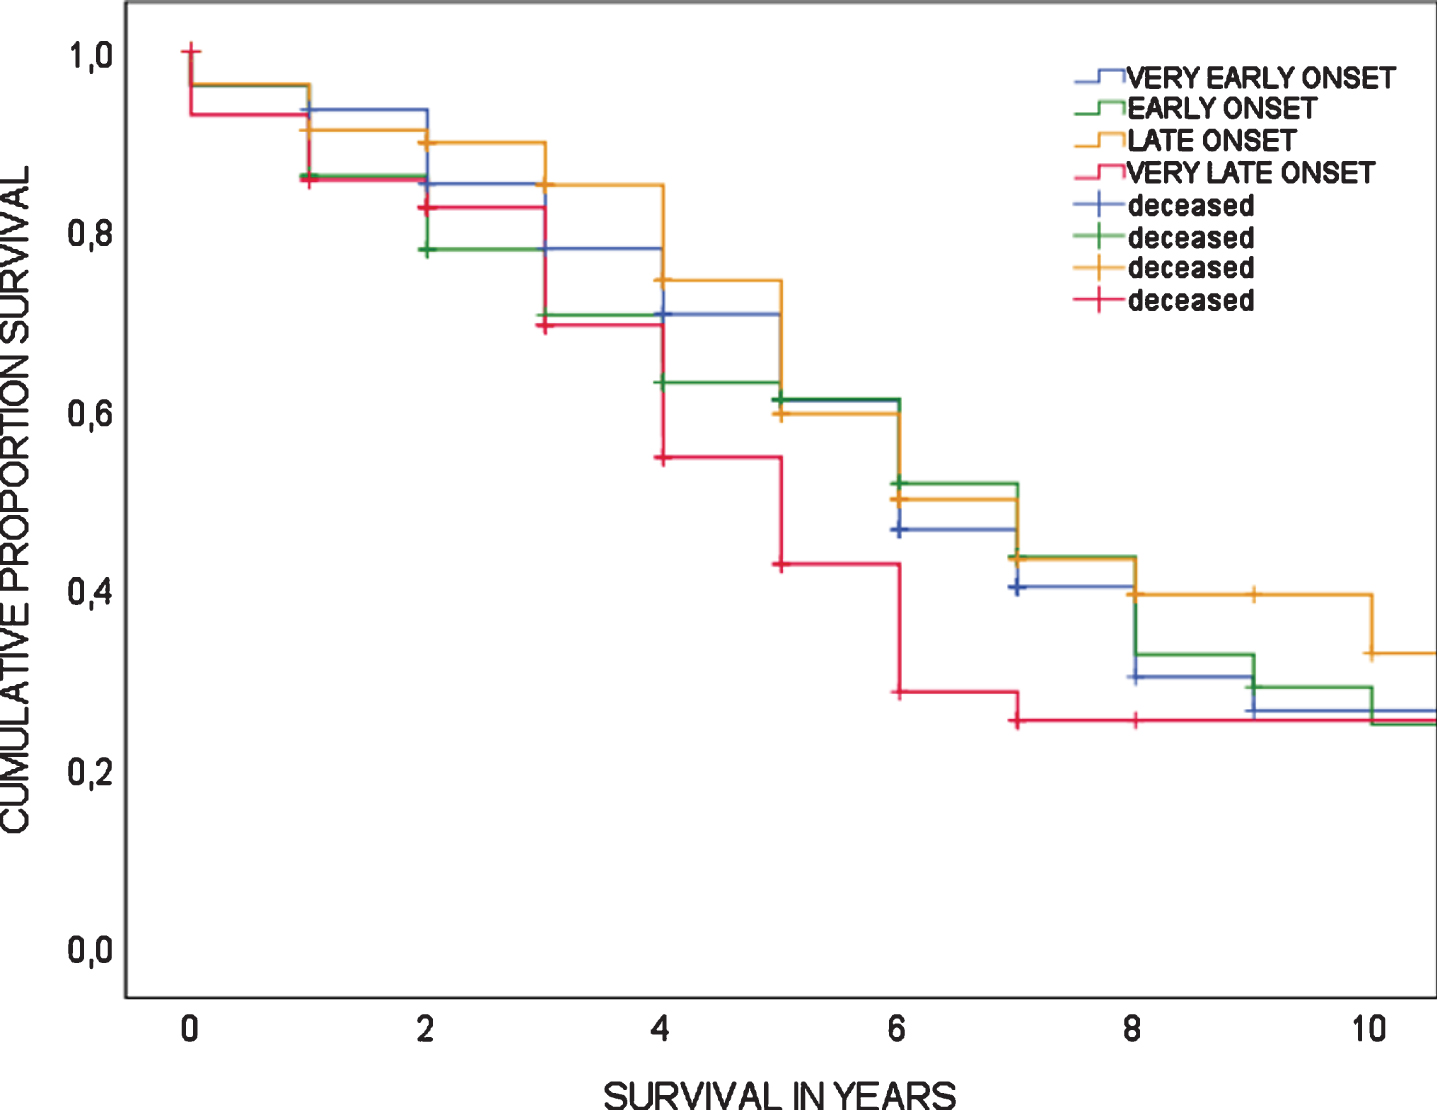 Survival in bvFTD, showing Kaplan-Meier curves according to age quartiles; log-rank test is p = 0.155.